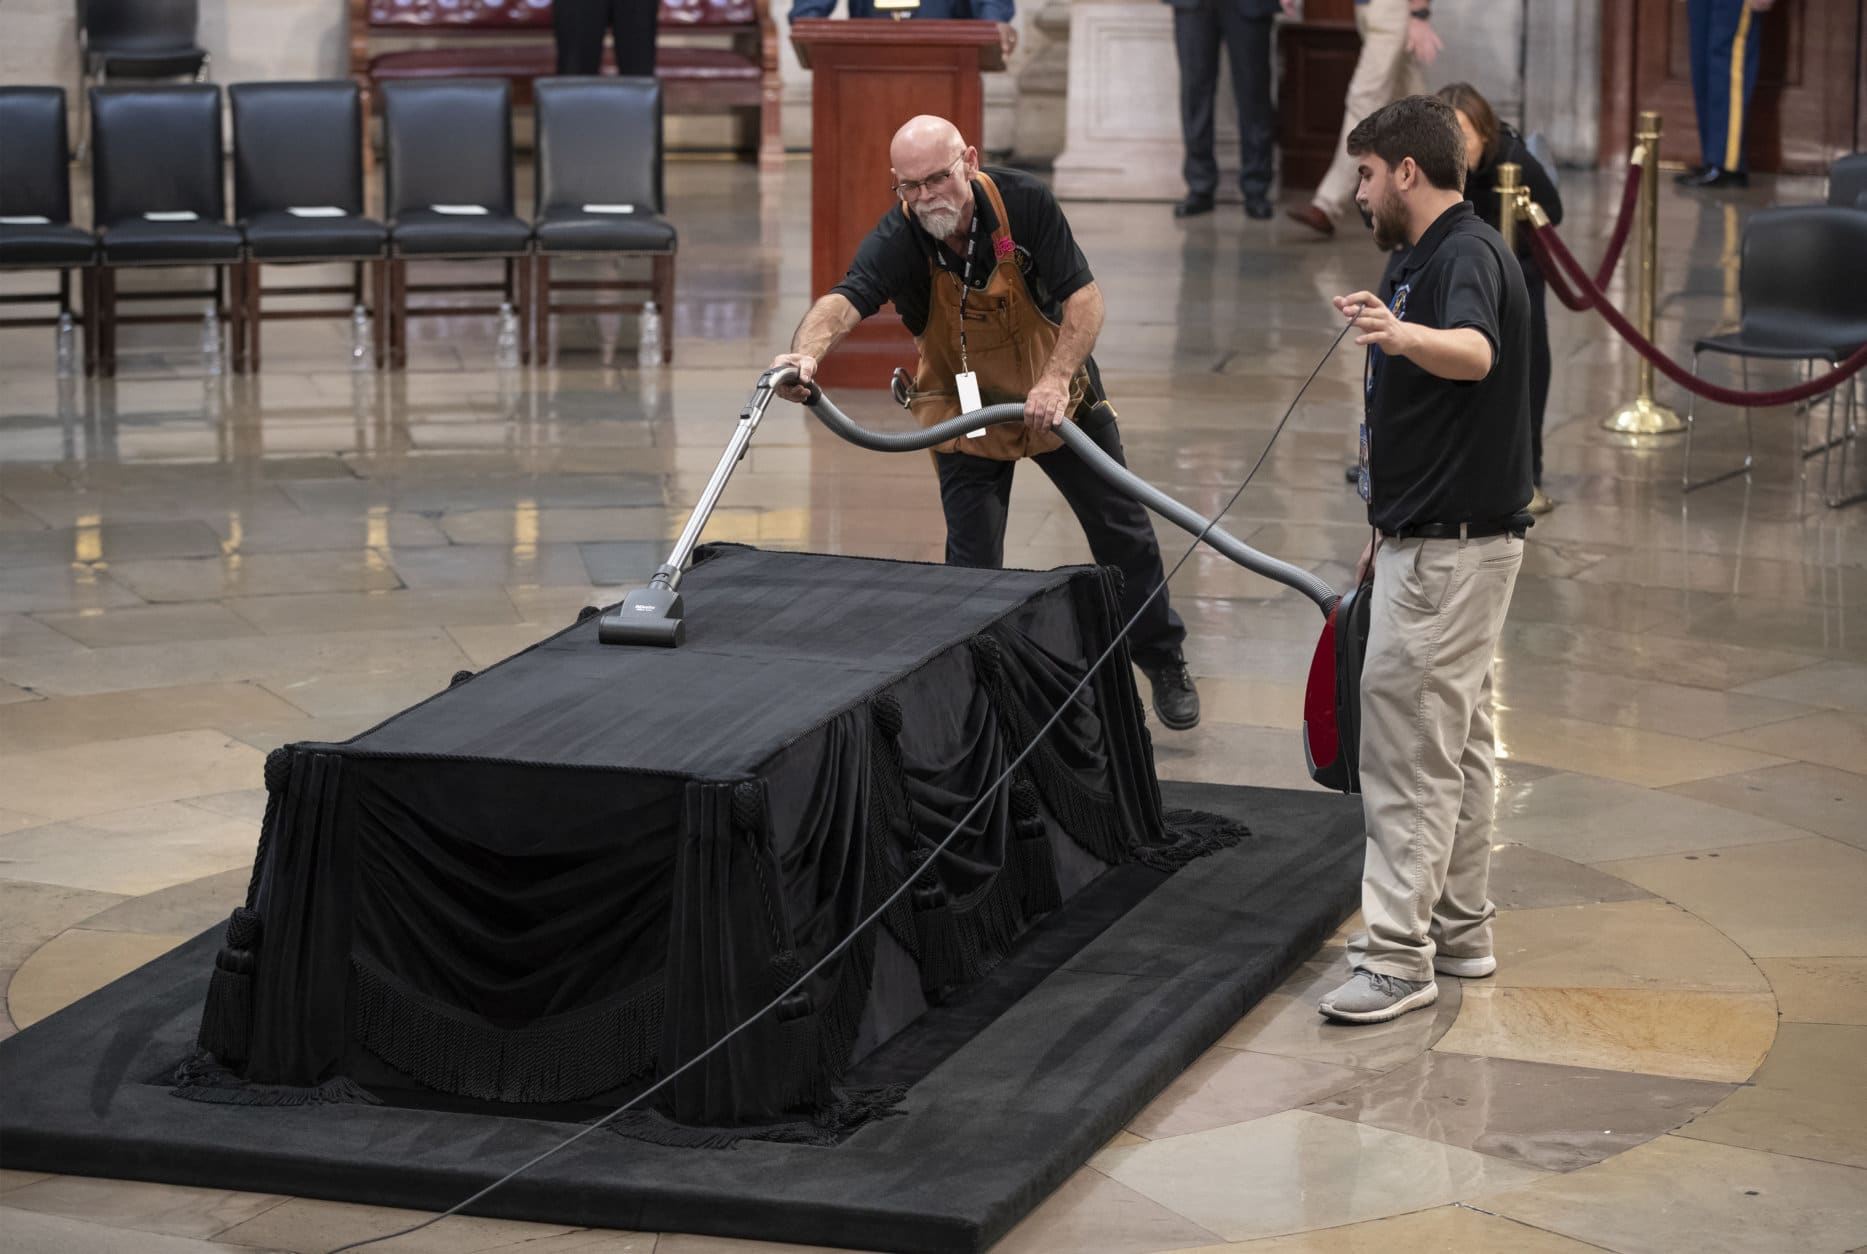 Mike Dean, lead upholsterer for the House of Representatives, and John Brady Jr., an apprentice, prepare the Lincoln Catafalque for the casket of former President George H.W. Bush, who died Friday at age 94, in the Capitol Rotunda in Washington, Monday, Dec. 3, 2018. (AP Photo/J. Scott Applewhite)